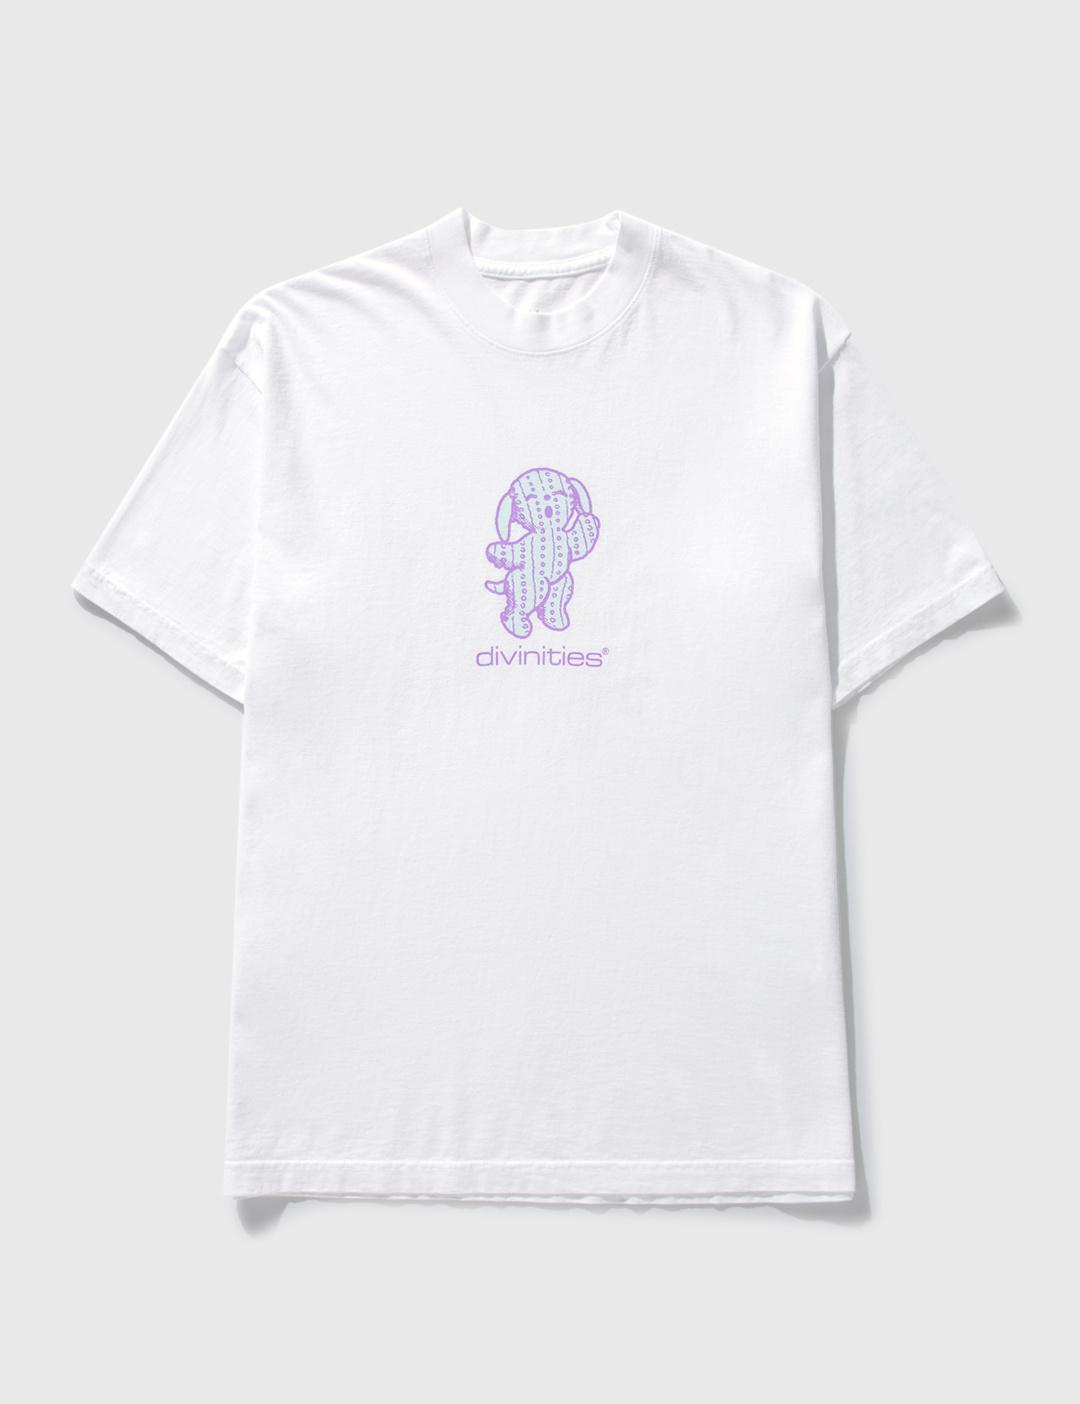 Yawn T-shirt by DIVINITIES